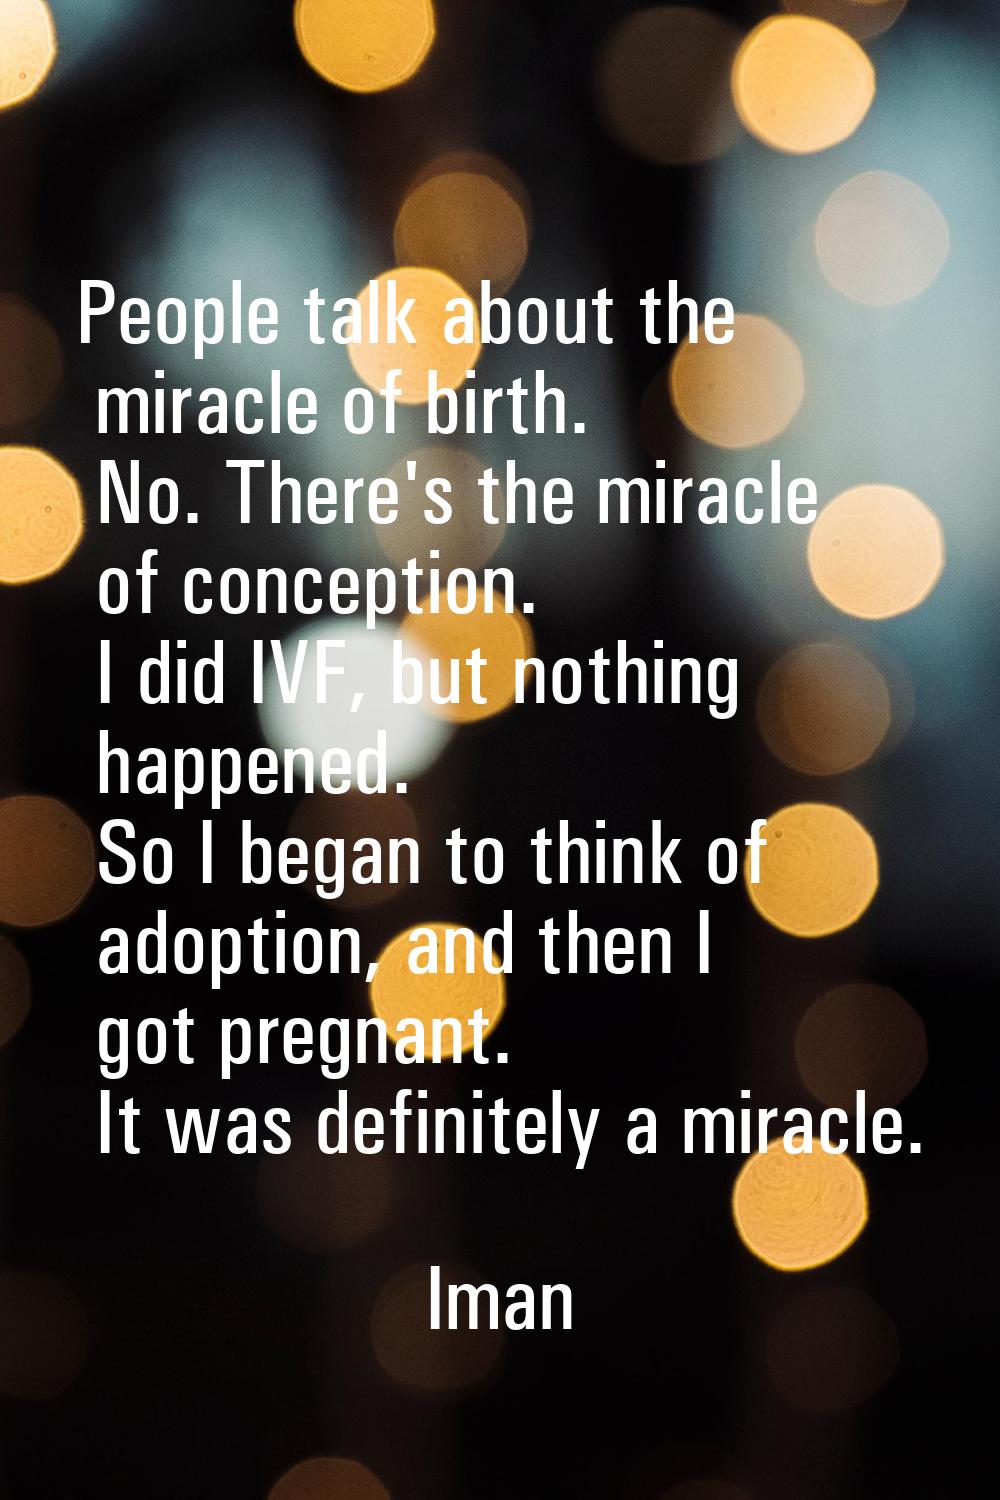 People talk about the miracle of birth. No. There's the miracle of conception. I did IVF, but nothi